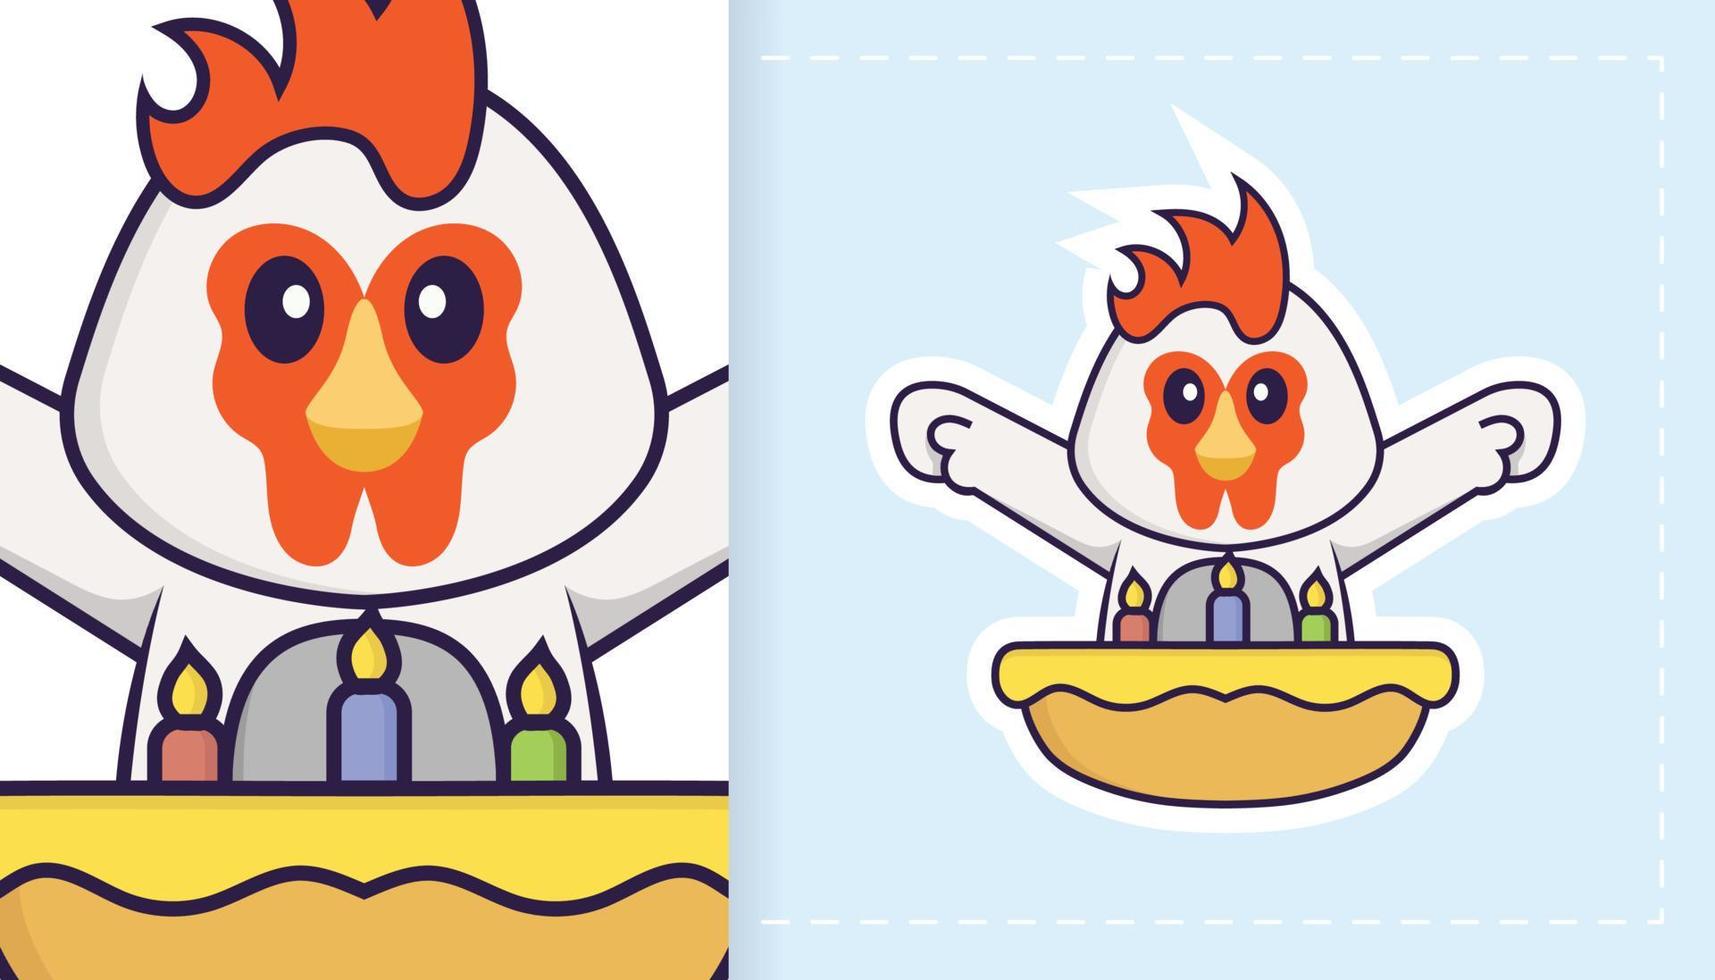 Cute vector chicken. Can be used for stickers, patches, textiles, paper. Vector illustration